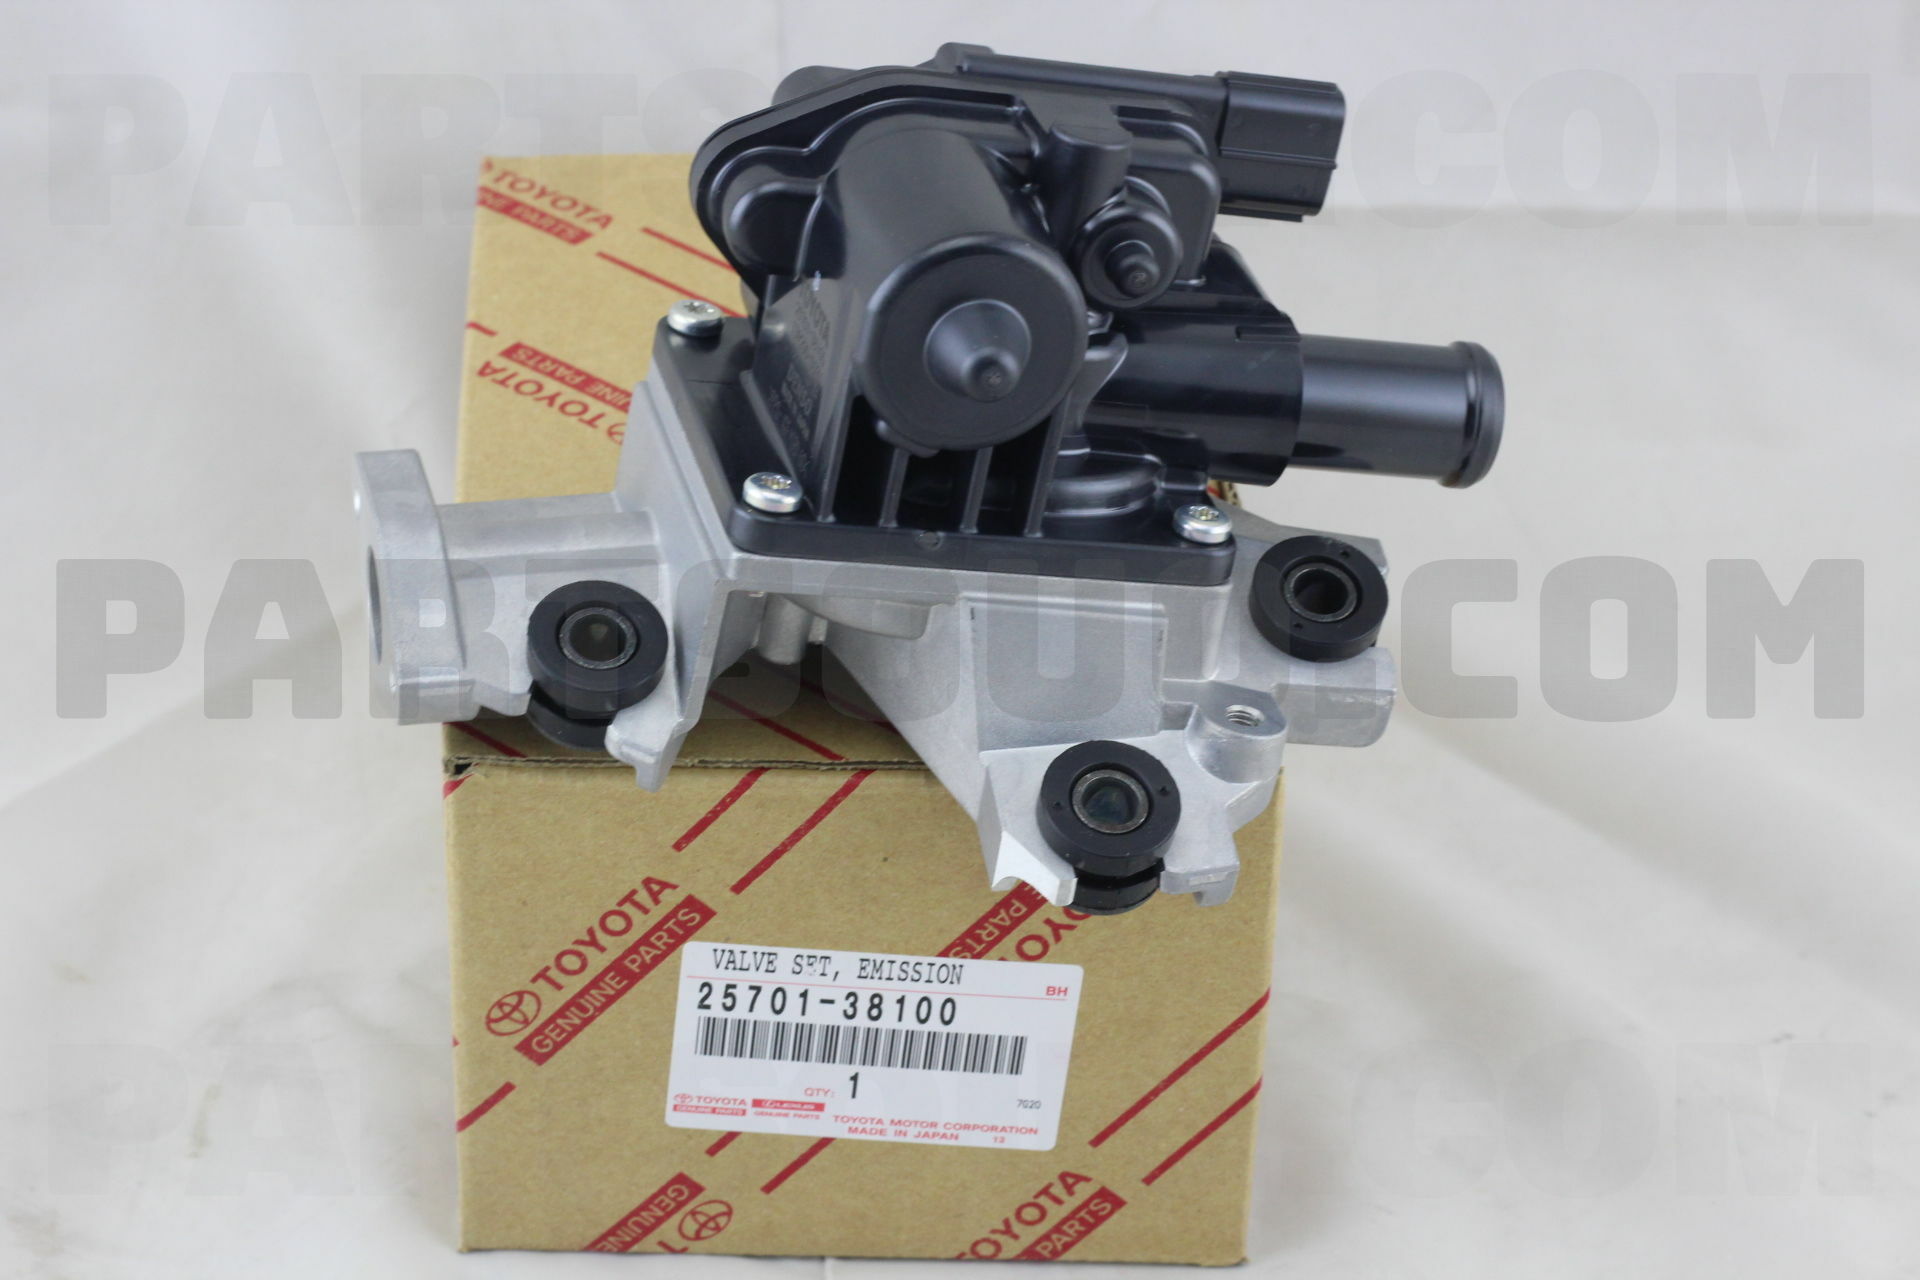 VALVE ASSY, AIR SWITCHING 2570138100 | Toyota Parts | PartSouq